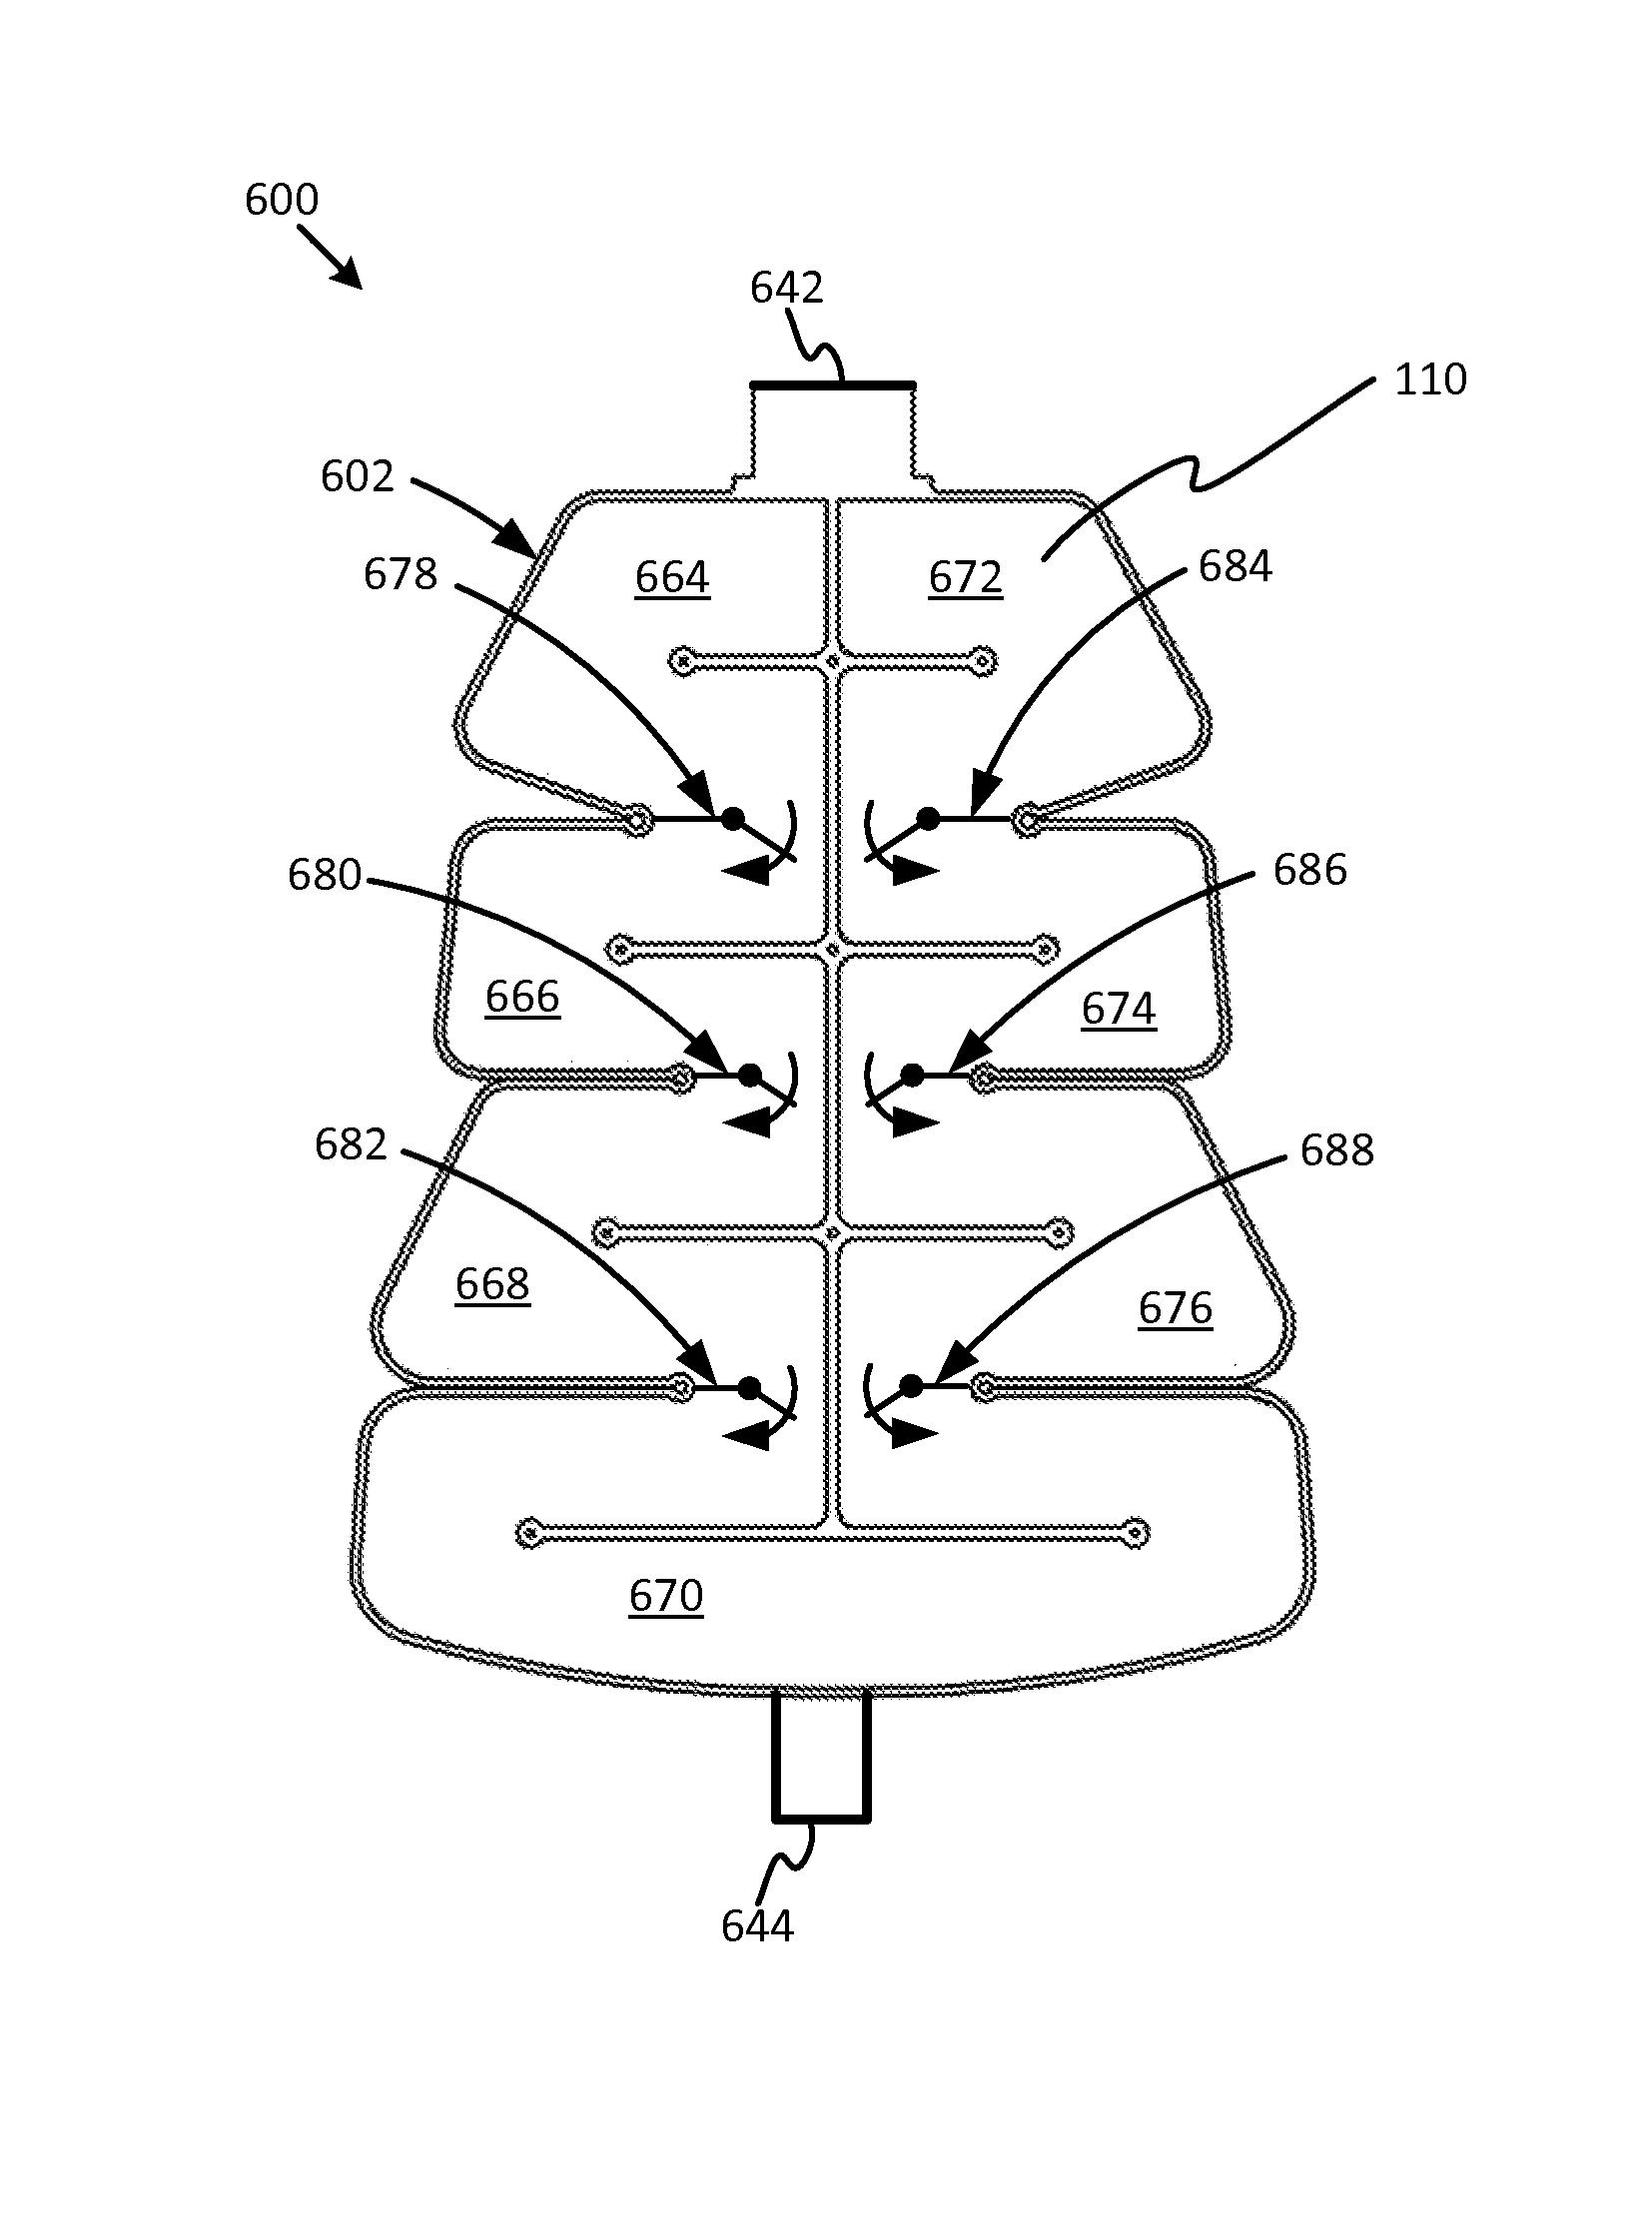 Patient warming device with patient access